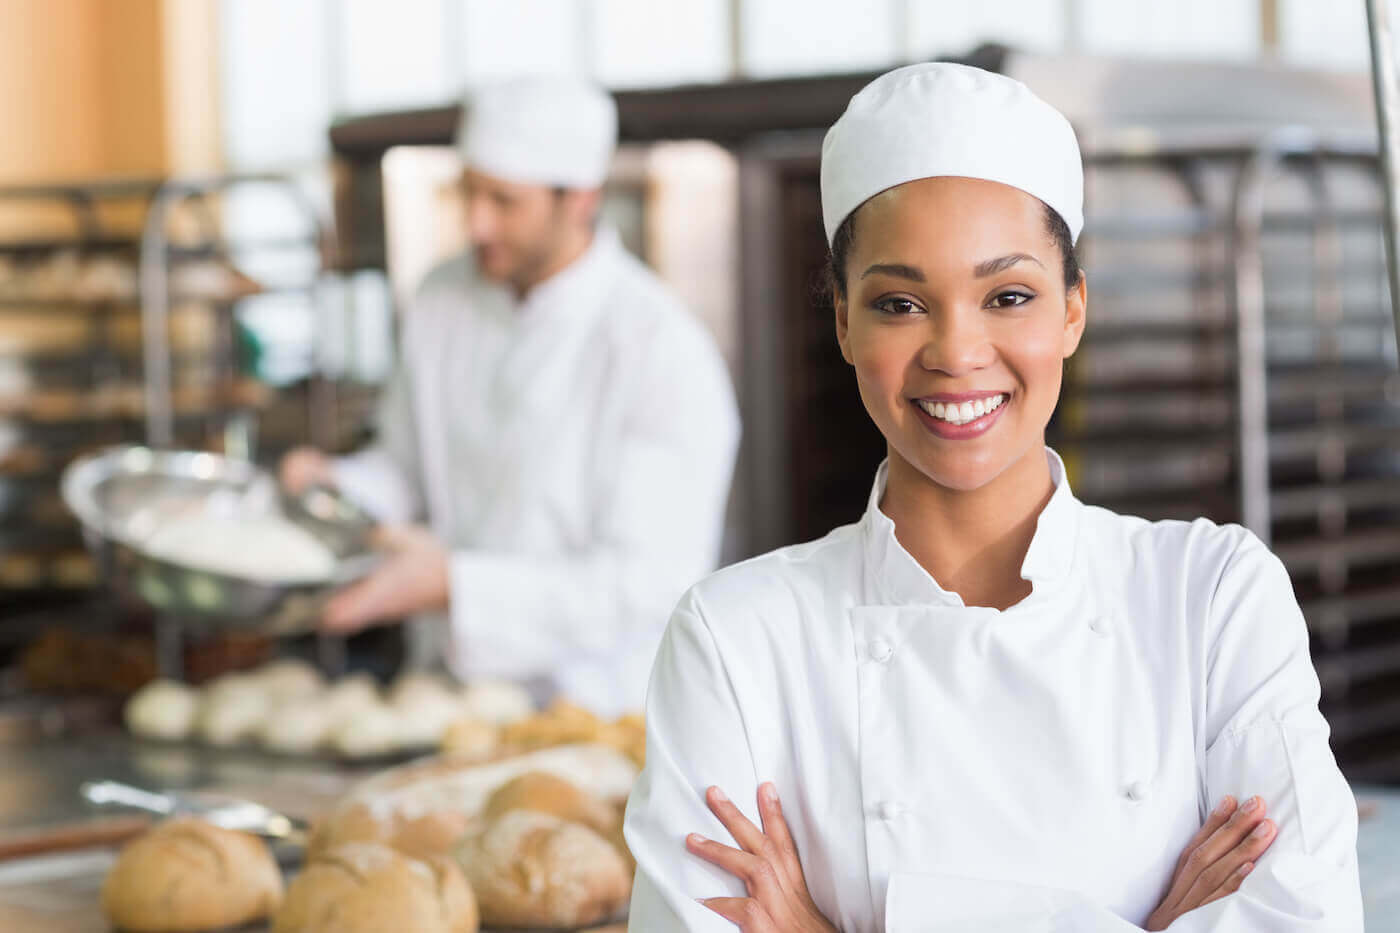 https://www.escoffier.edu/wp-content/uploads/2022/04/Smiling-female-chef-in-a-bakery-with-loaves-of-bread-1400.jpg